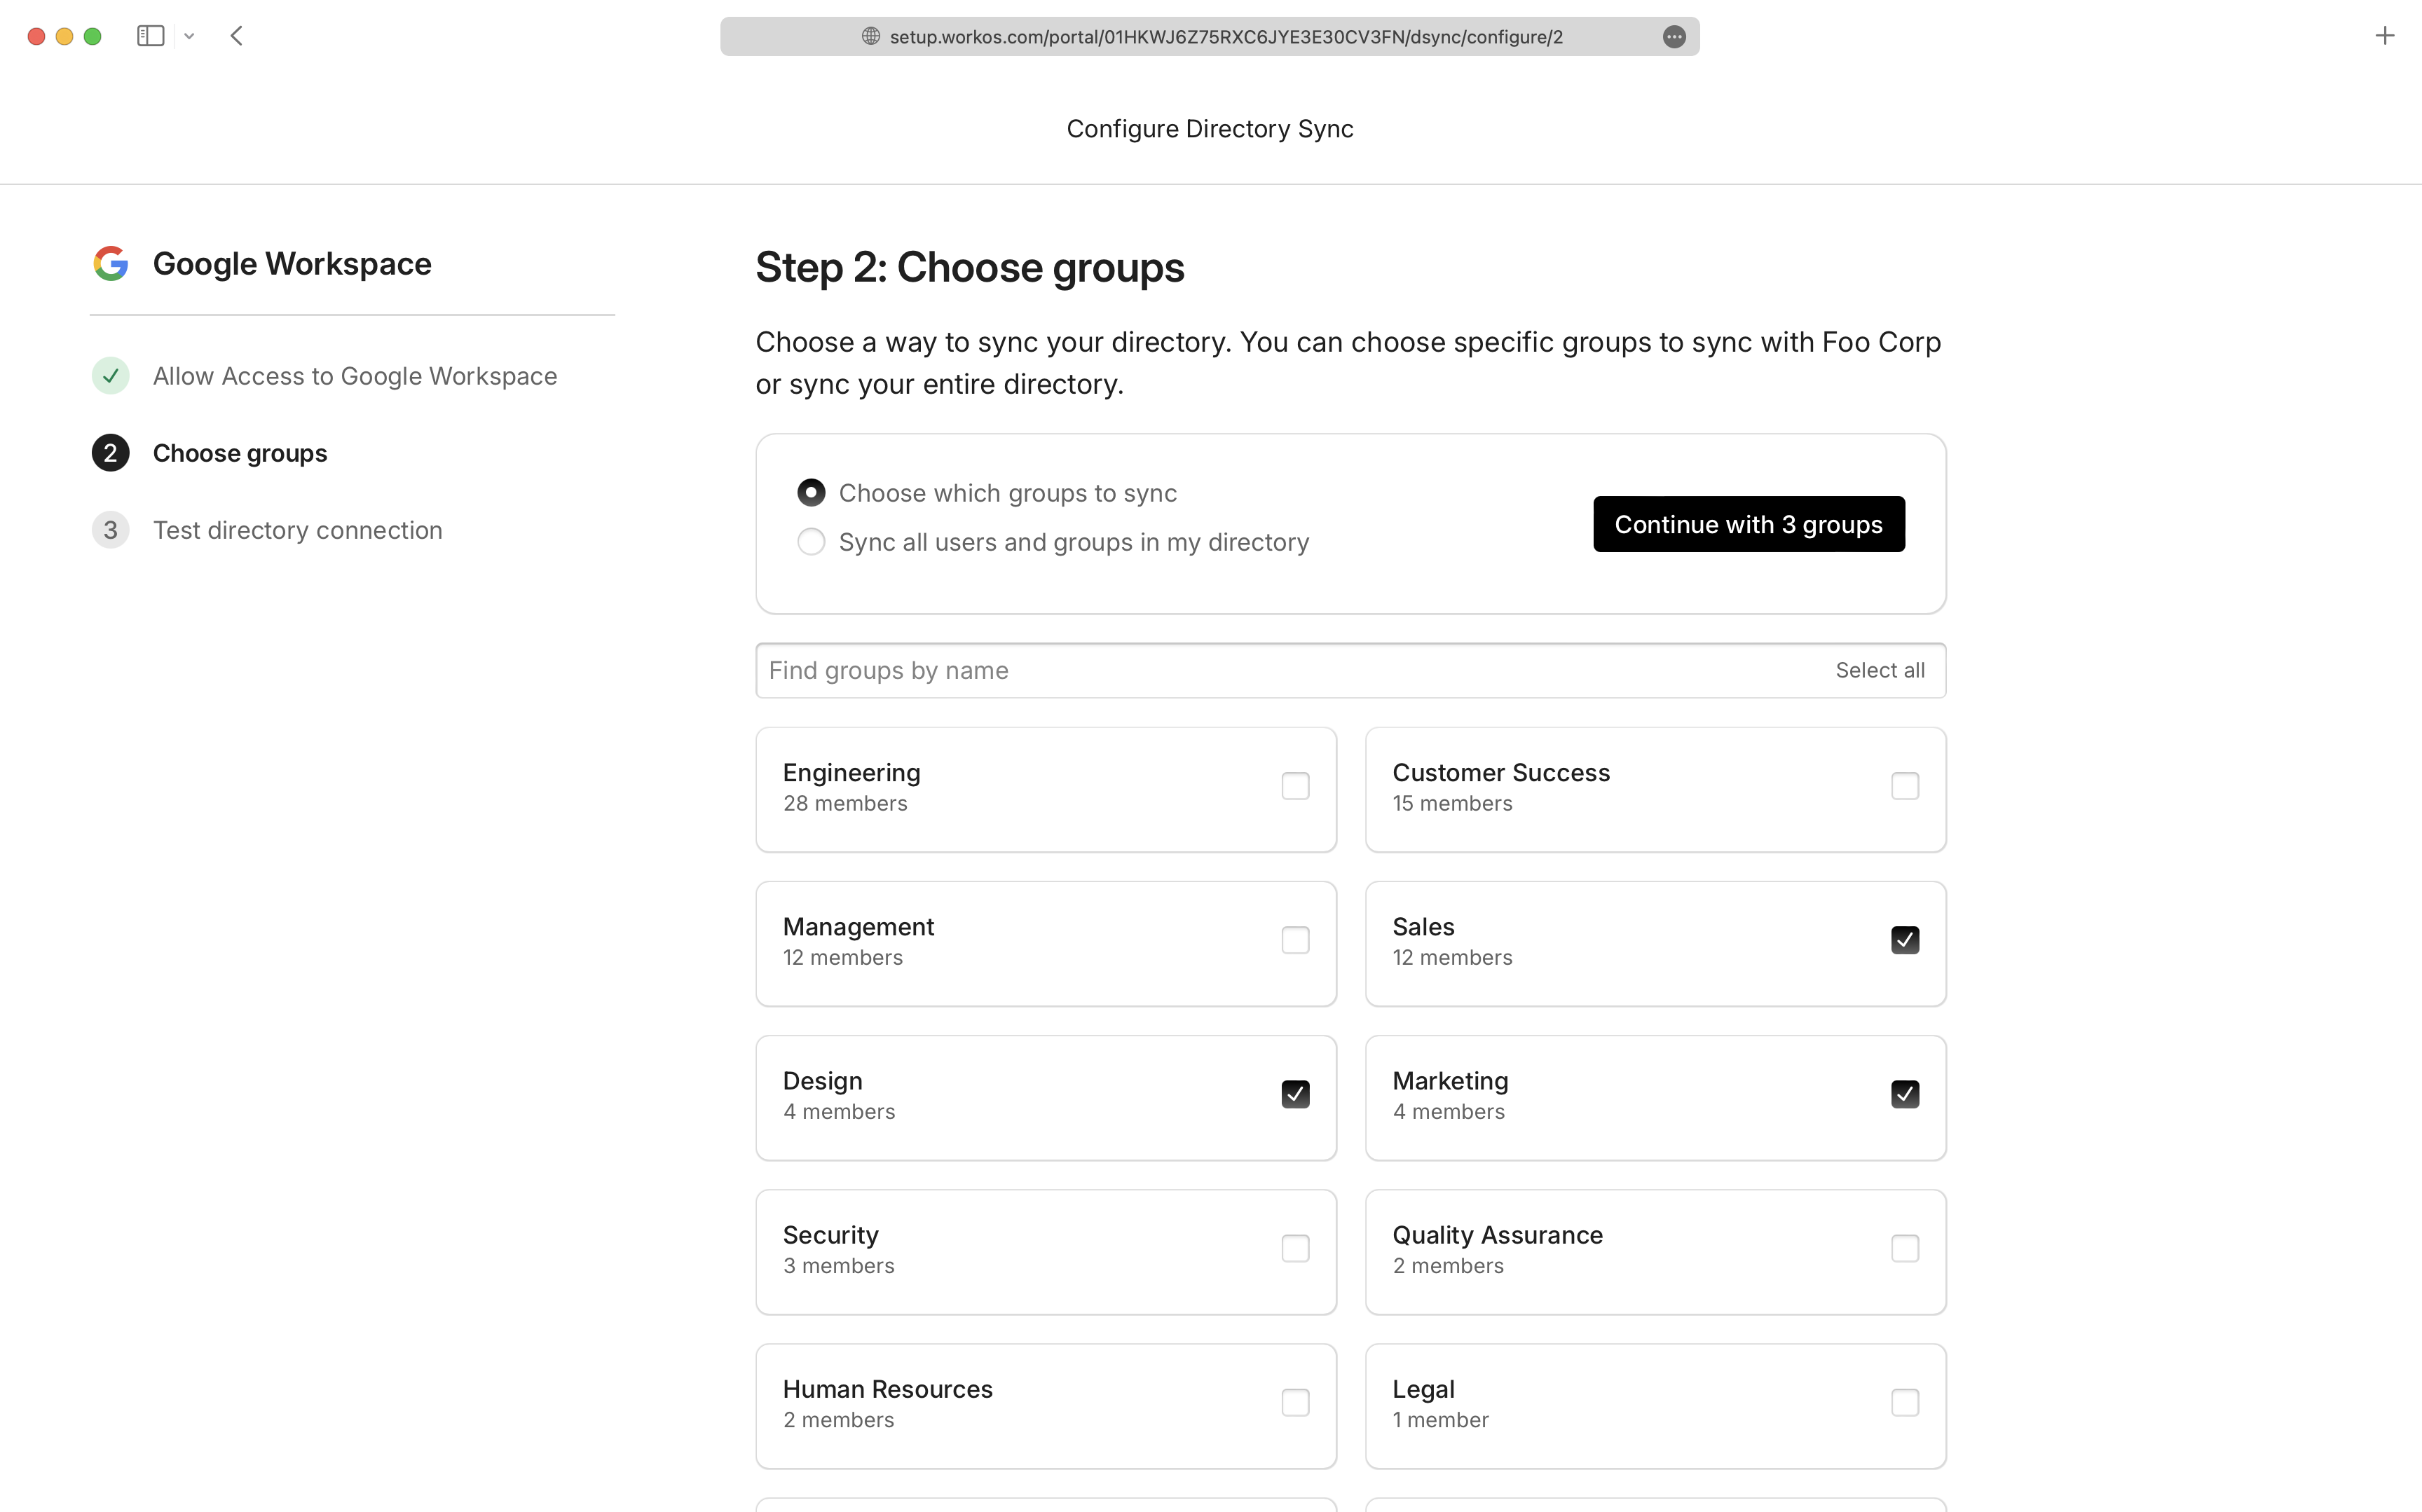 A screenshot showing the setup screen with how to filter groups to sync.